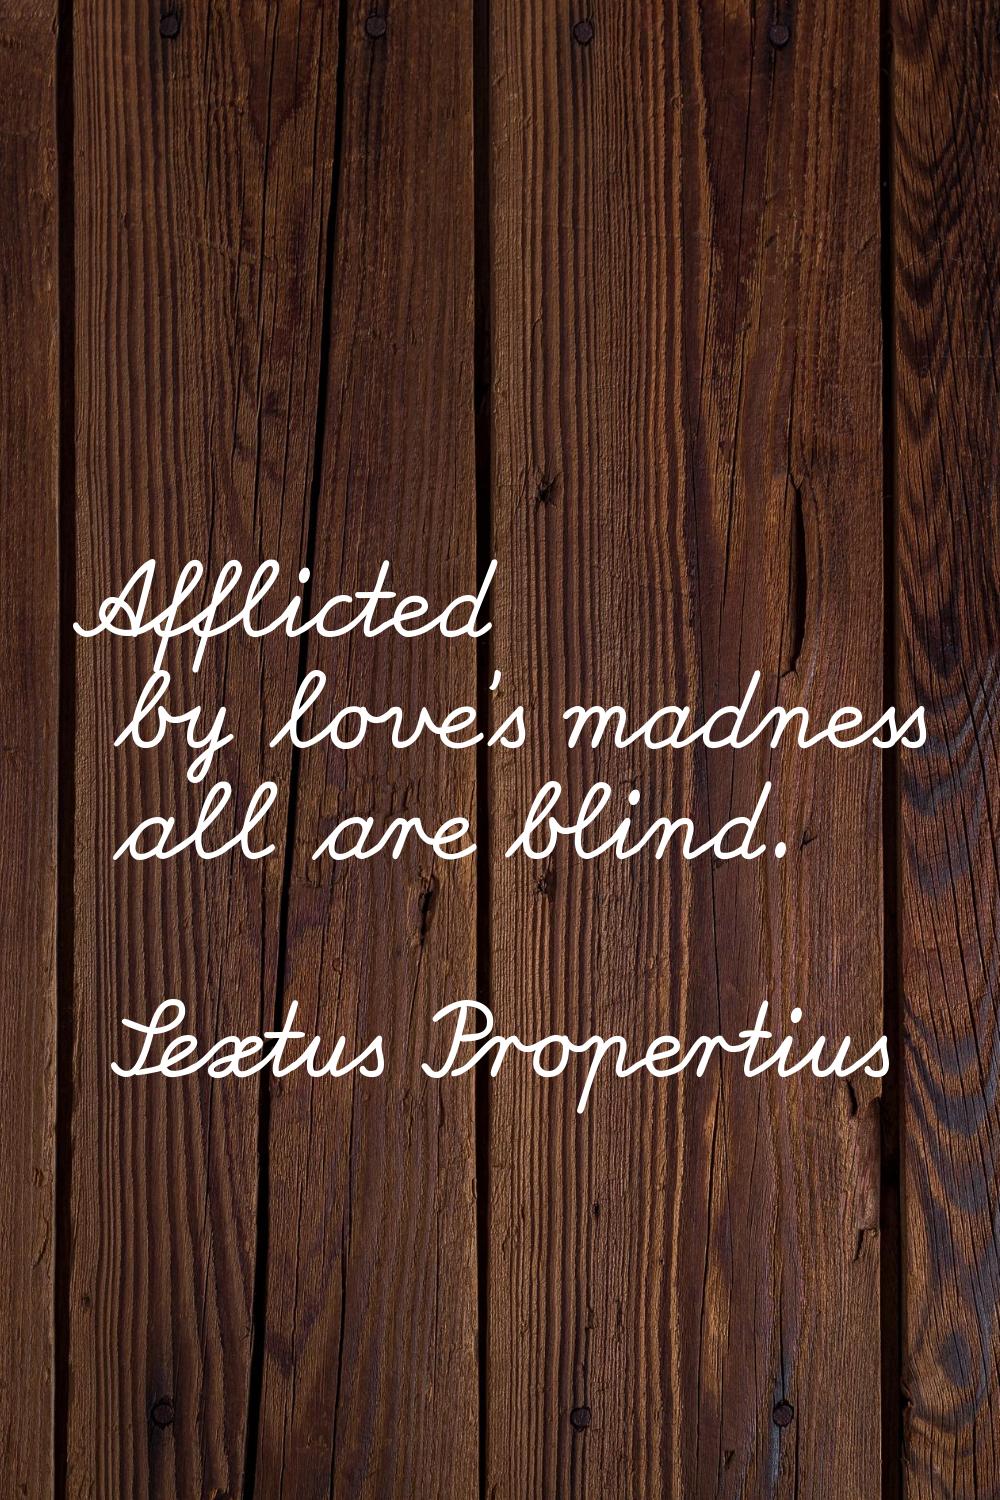 Afflicted by love's madness all are blind.